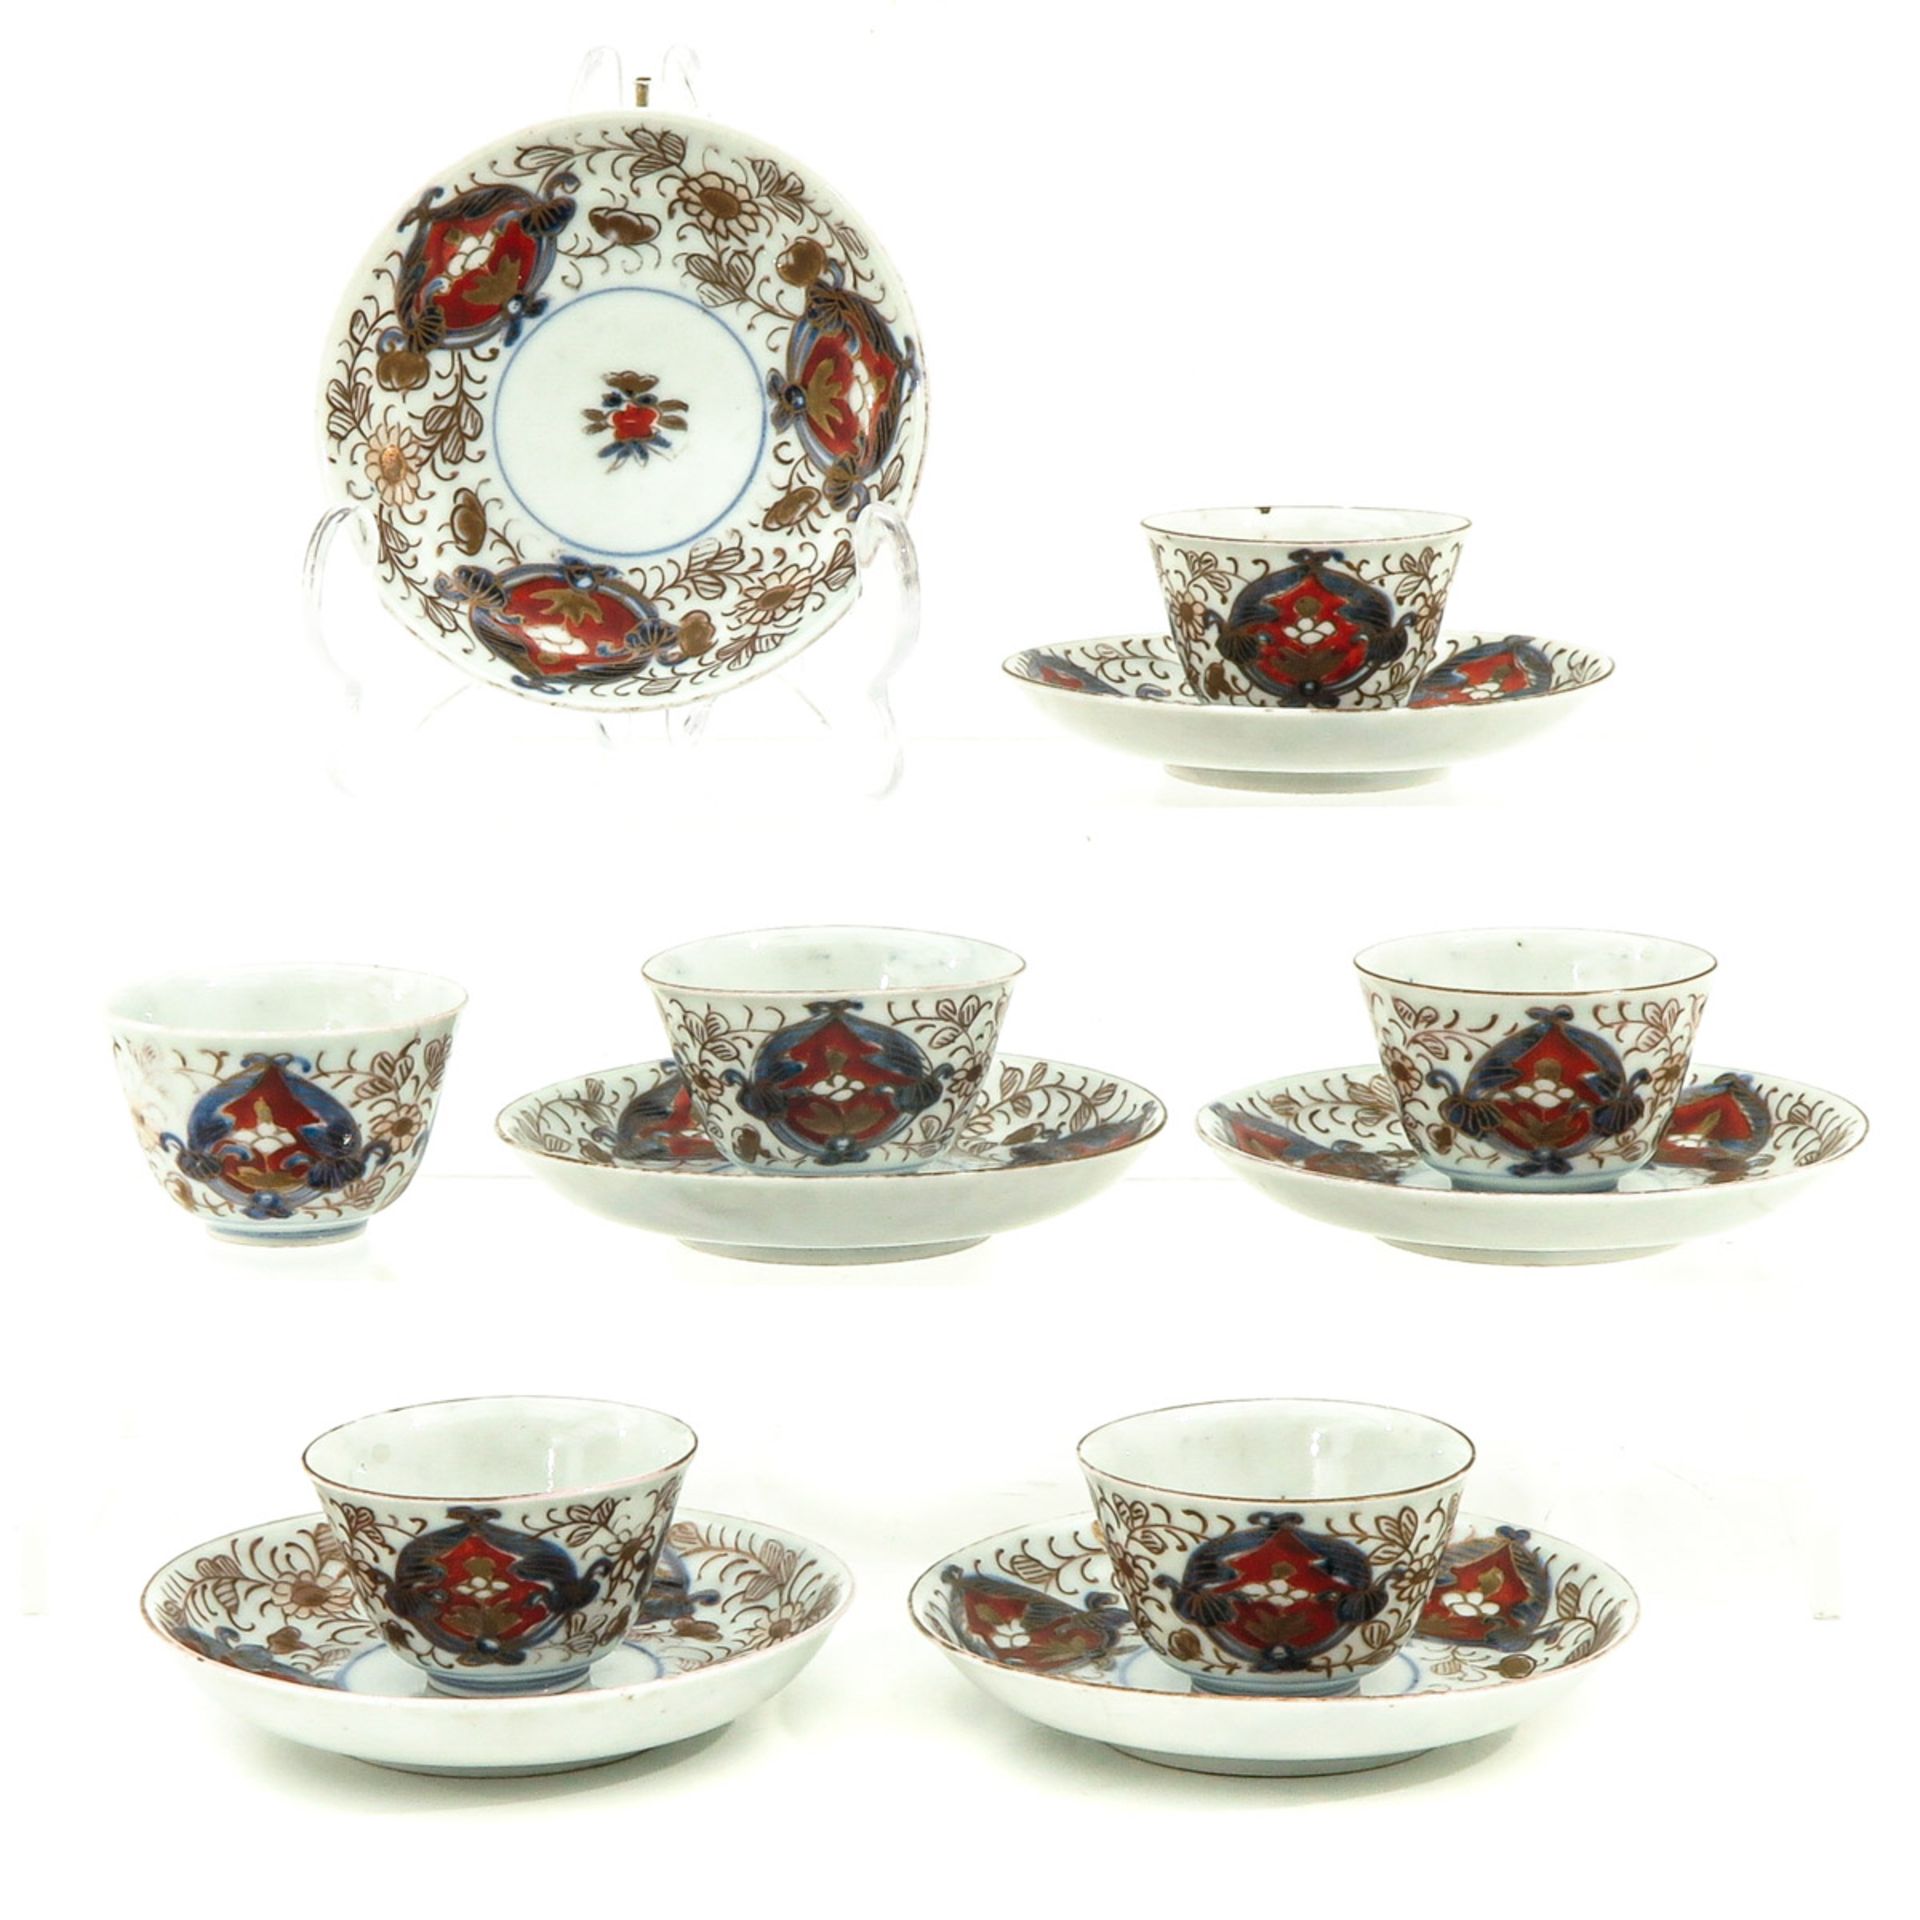 A Collection of 6 Imari Cups and Saucers